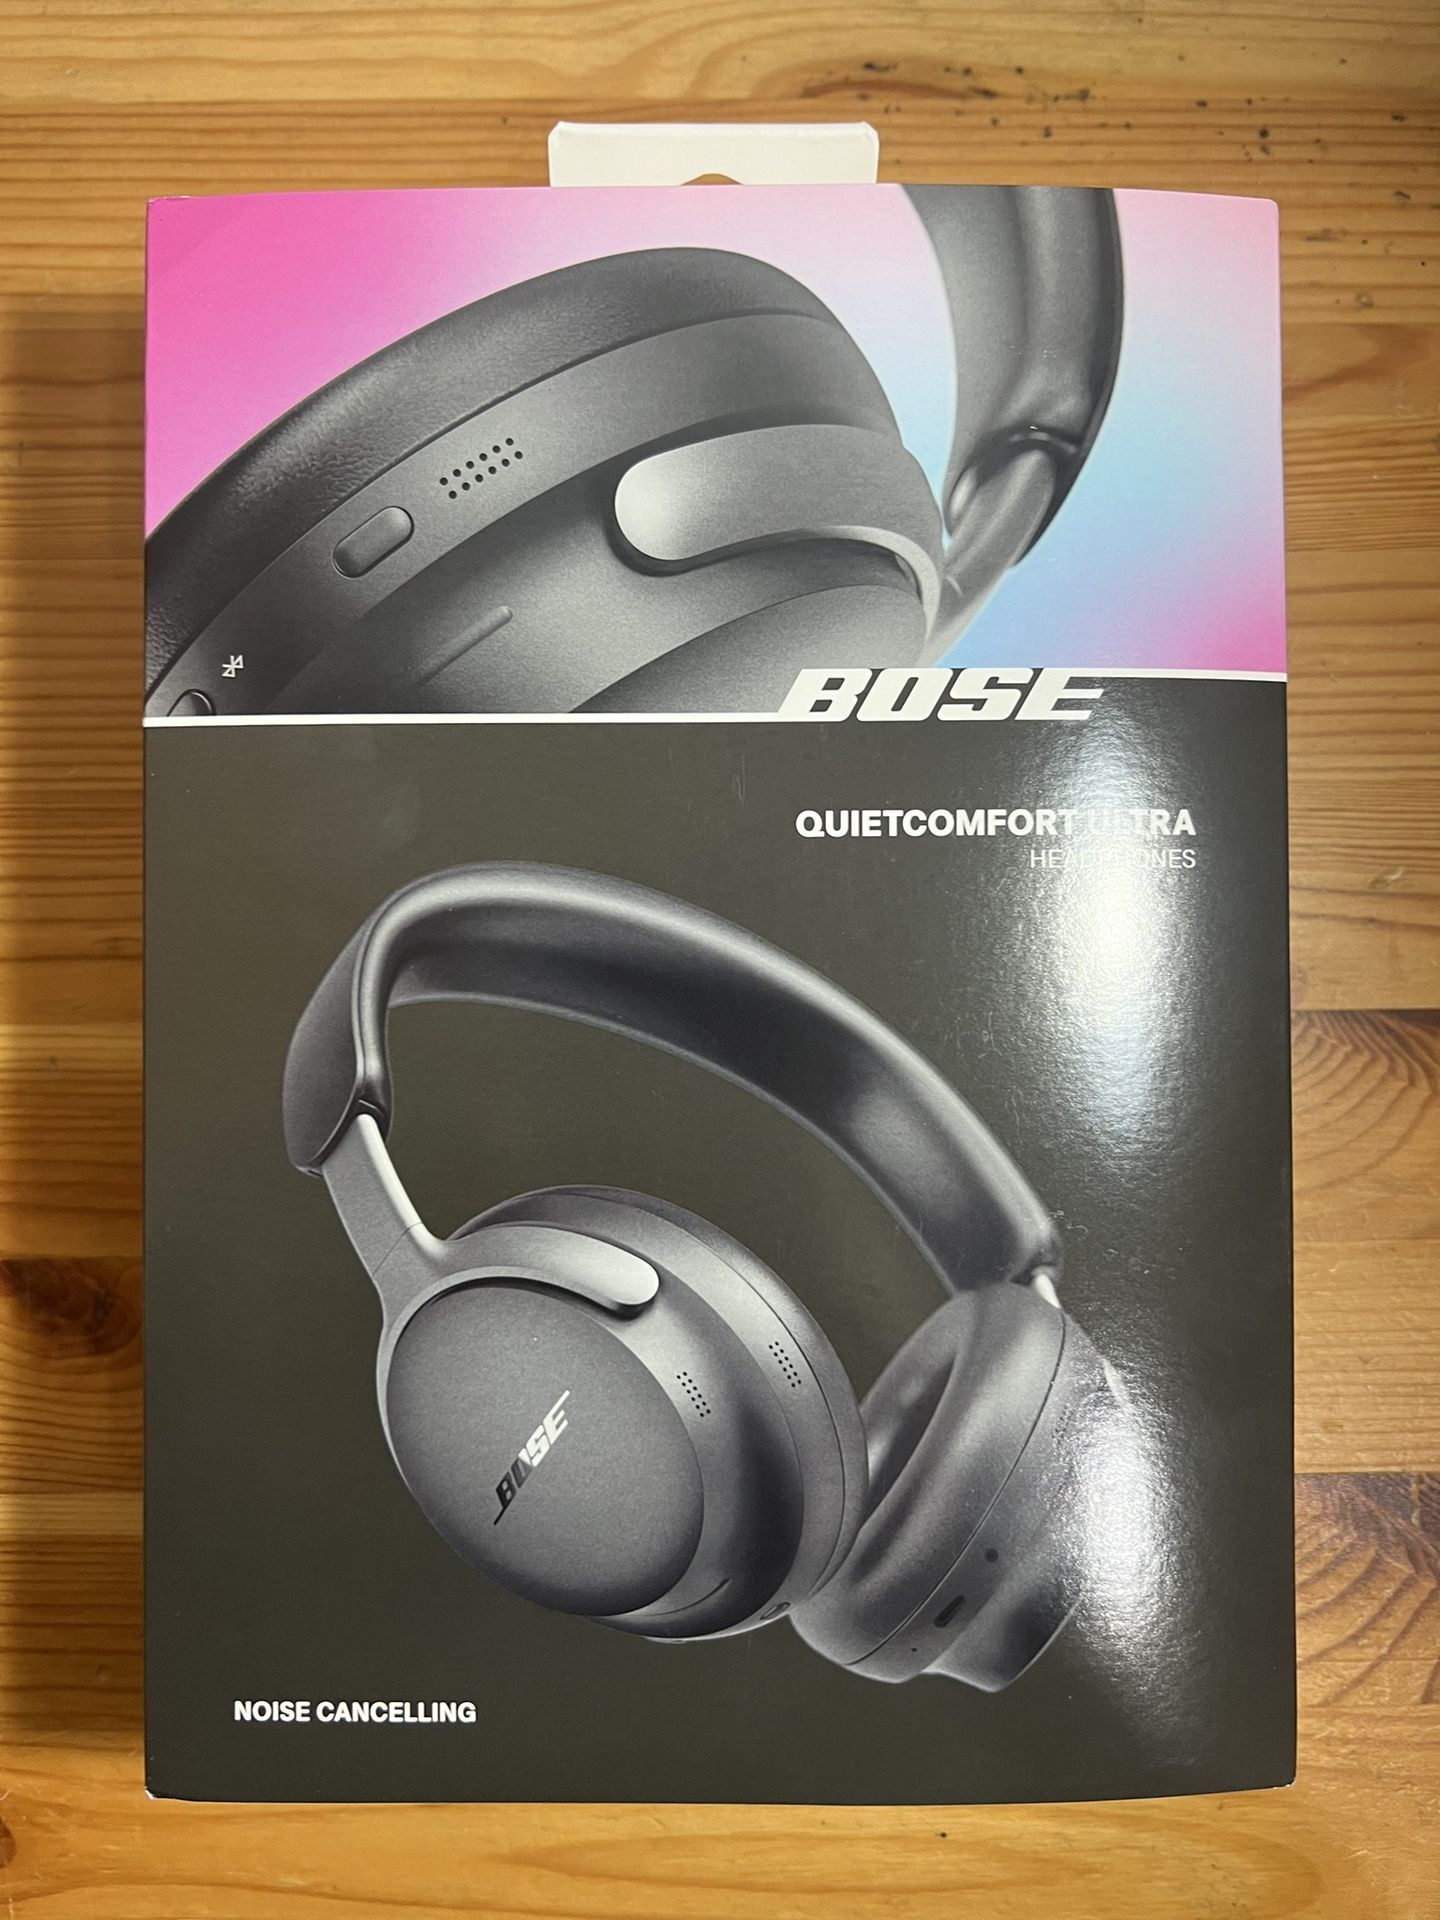 NEW Bose QuietComfort Ultra Wireless Noise Cancelling Headphones with Spatial Audio, Over-the-Ear Headphones with Mic, Up to 24 Hours of Battery Life,